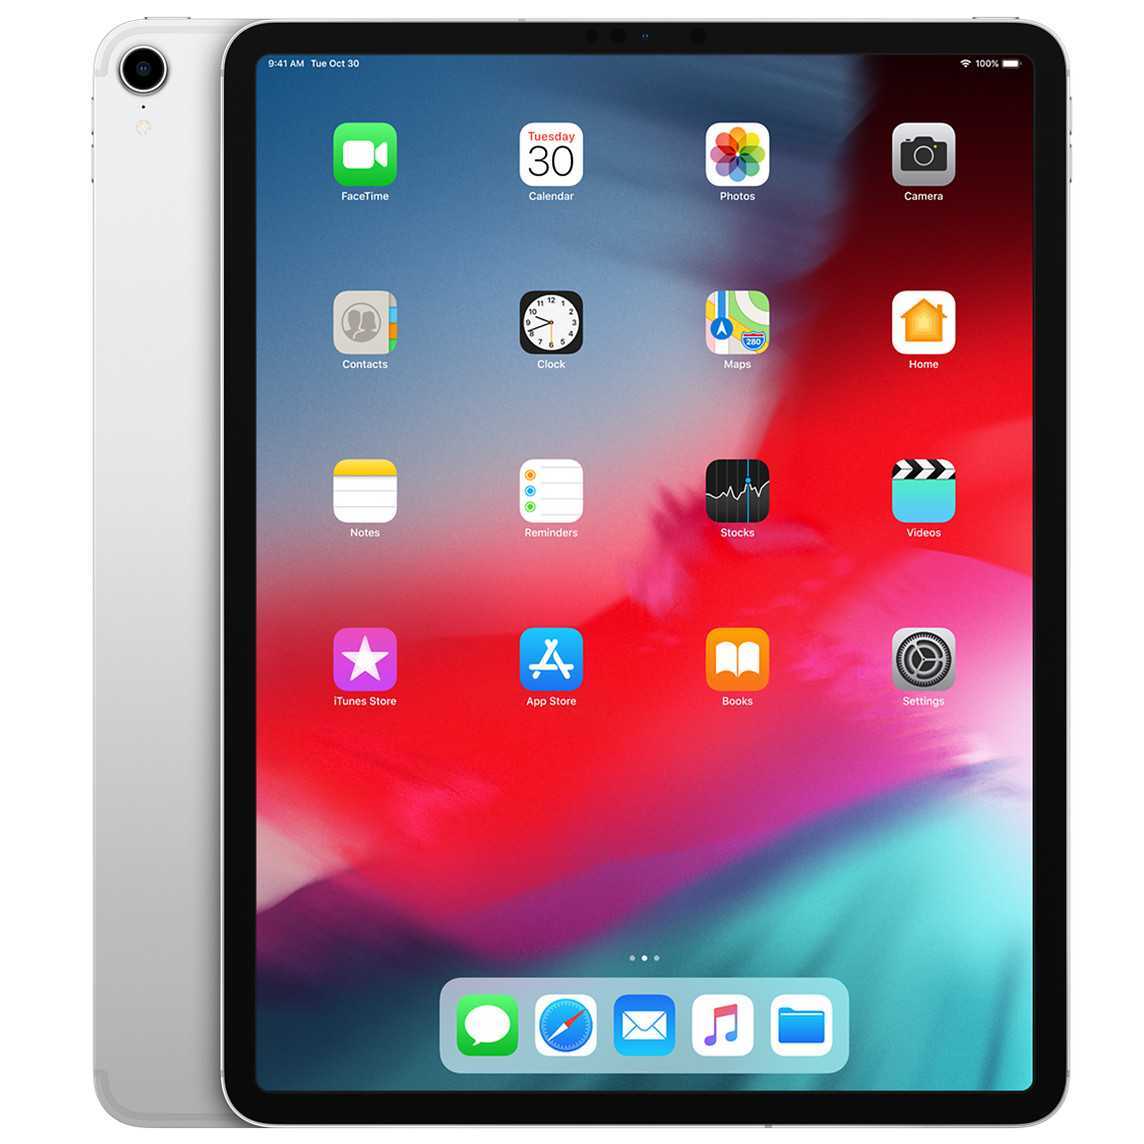 Ipad Pro 12.9 wifi +Cellular 6th Generation brand new just box open-pic_1